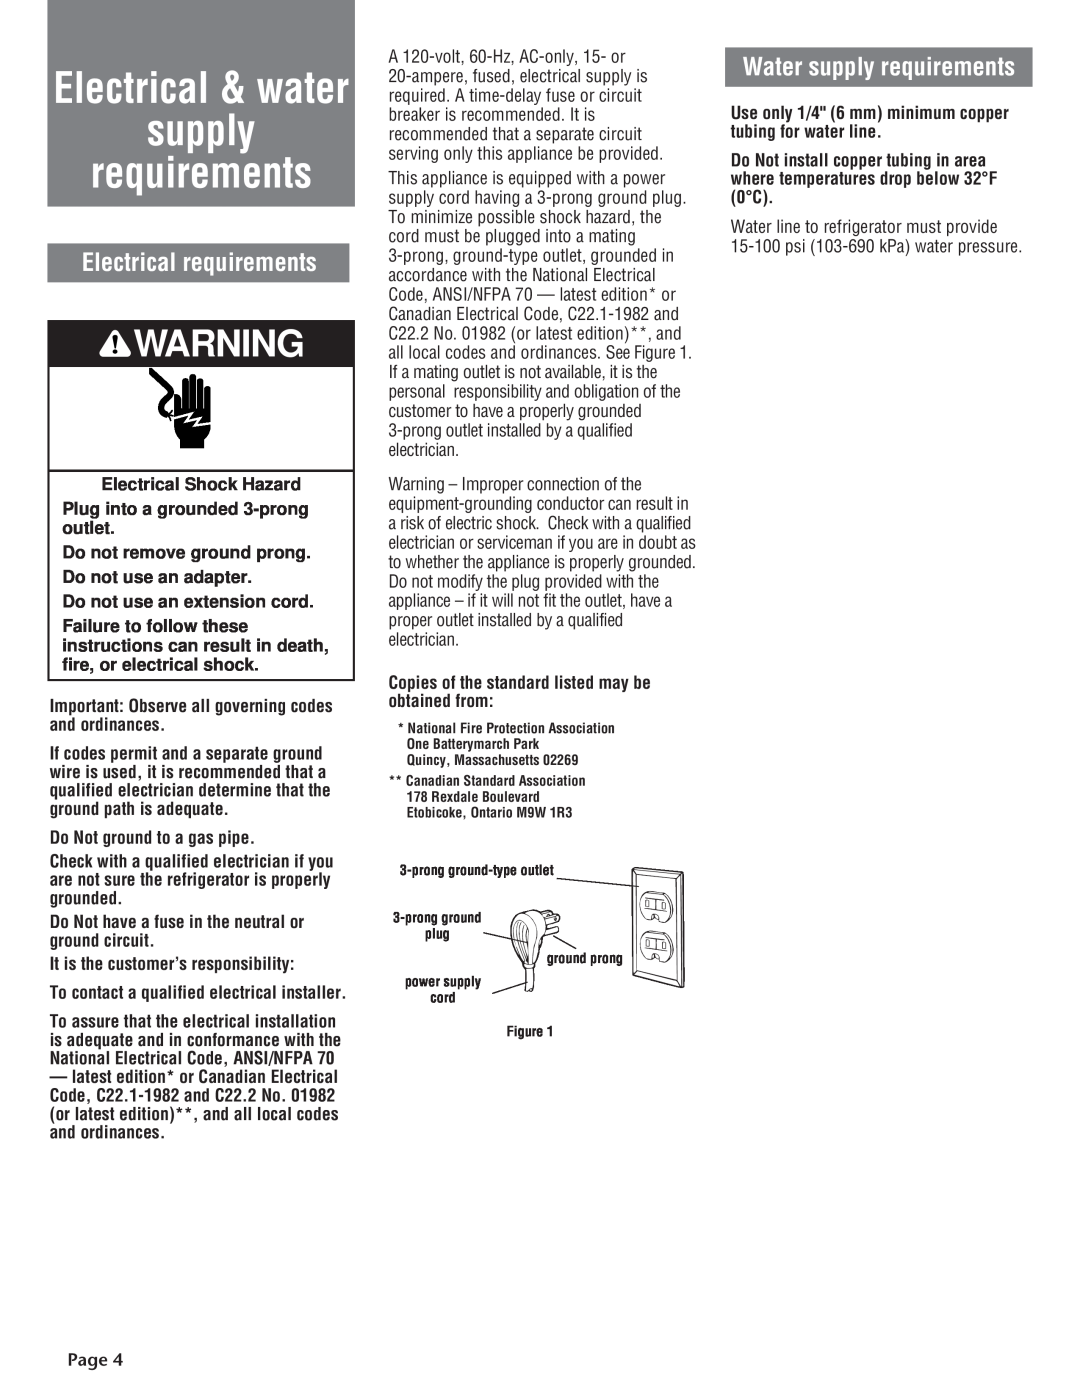 KitchenAid 2210725 manual Electrical requirements, Water supply requirements, Electrical & water, Page 